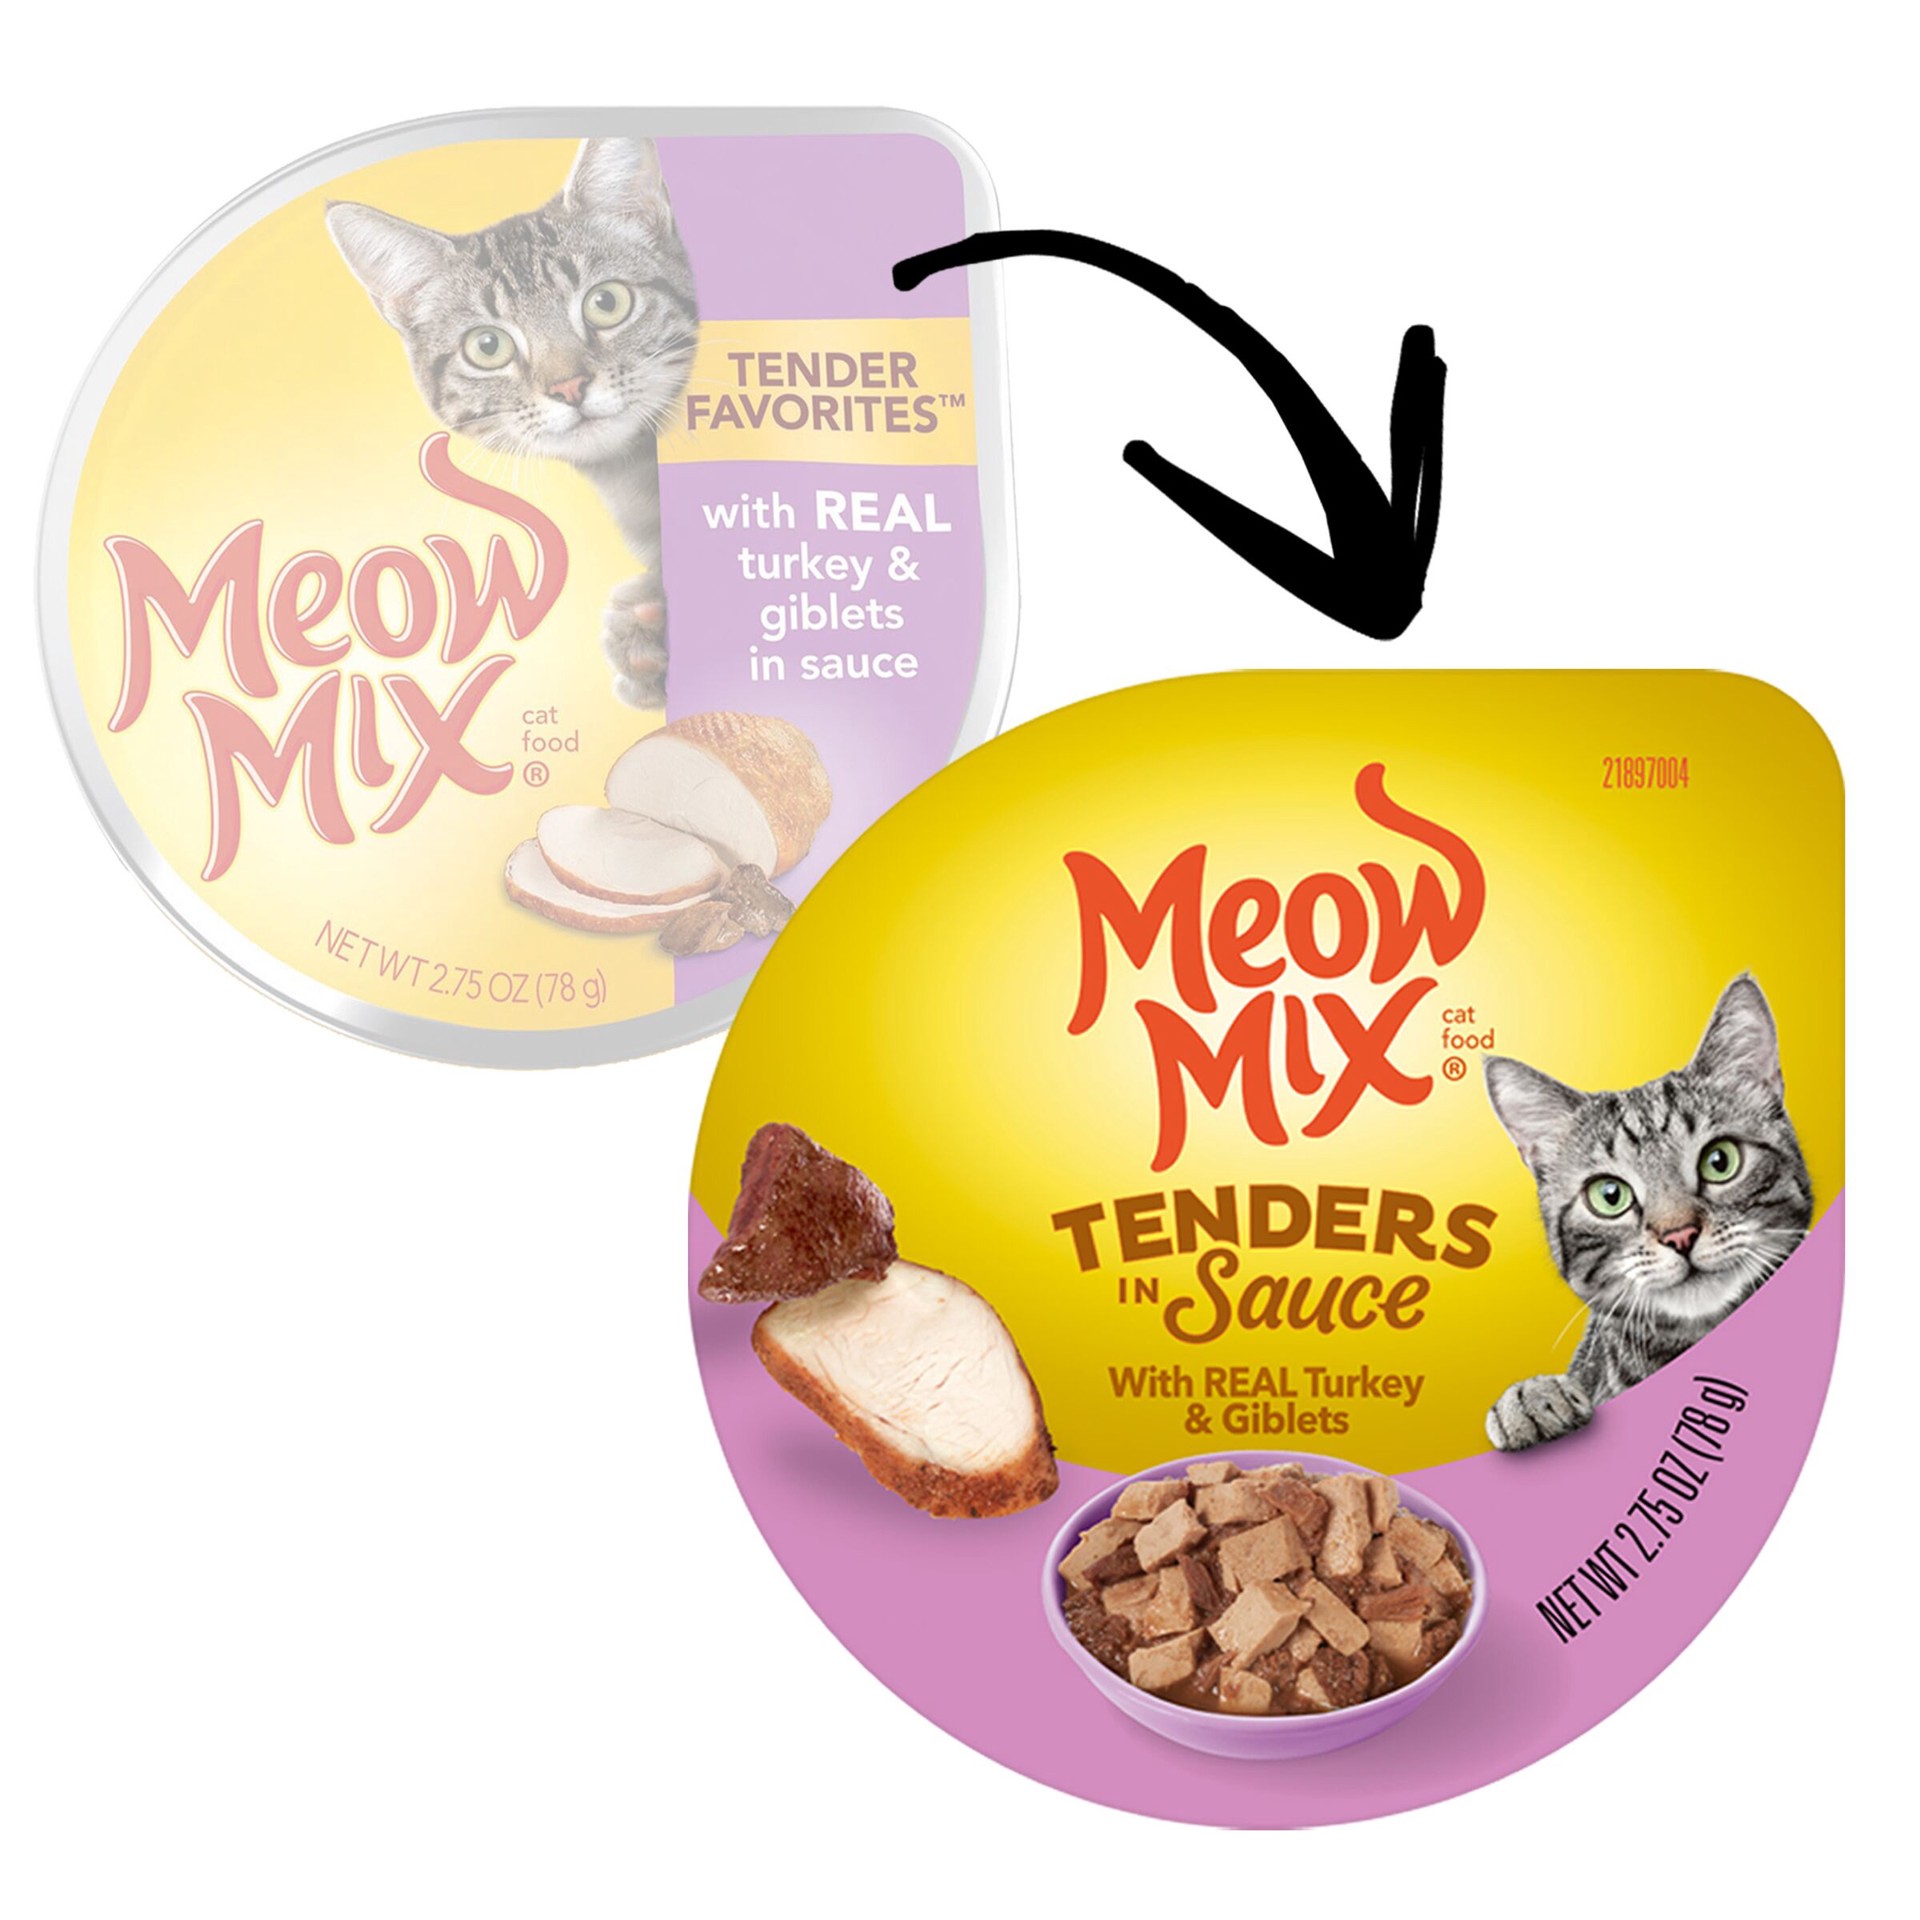 slide 2 of 10, Meow Mix Tender Favorites Cat Food, W/ Real Turkey & Giblets In Sauce, 2.75 oz